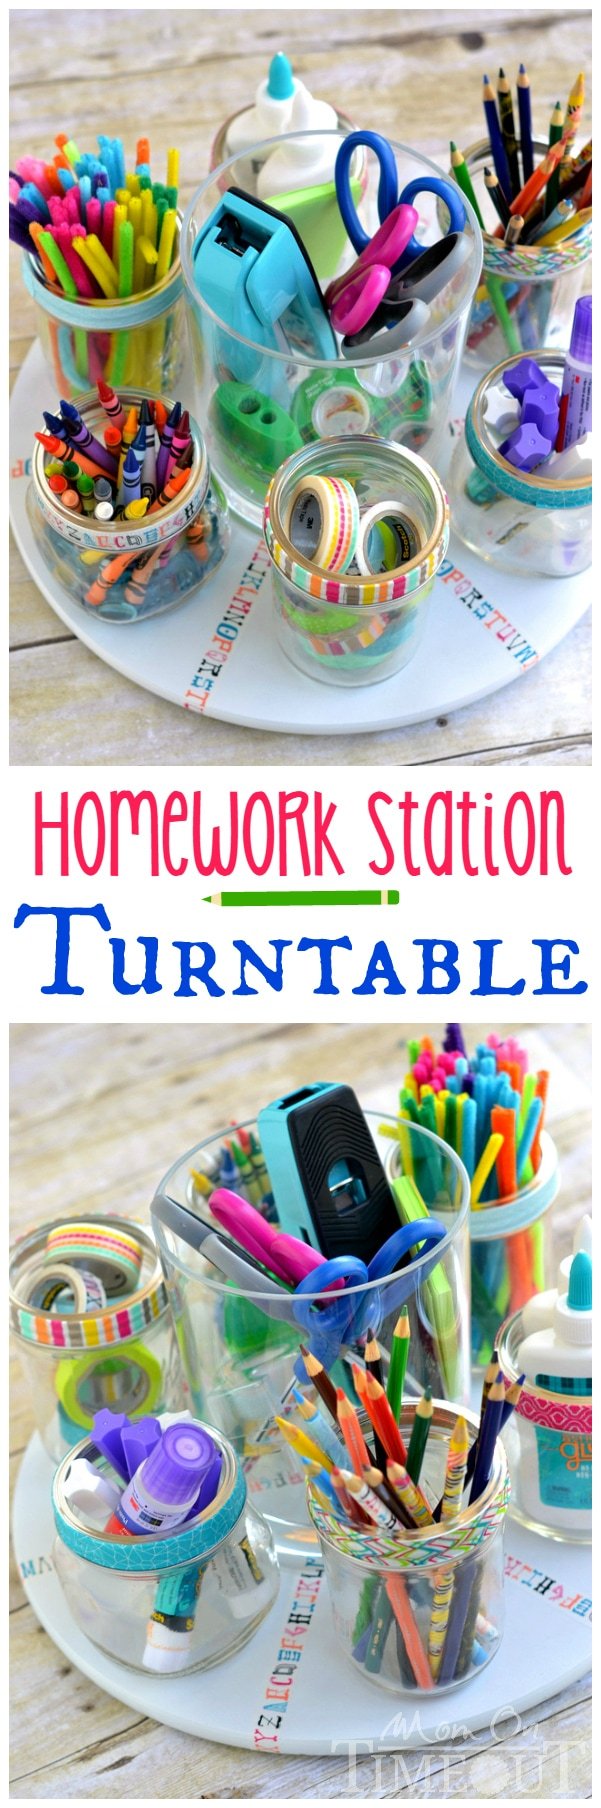  Homework time doesn't have to be a pain! This Homework Station Turntable keeps all homework supplies at your fingertips! | MomOnTimeout.com | #craft #school #MakeAmazing #ad